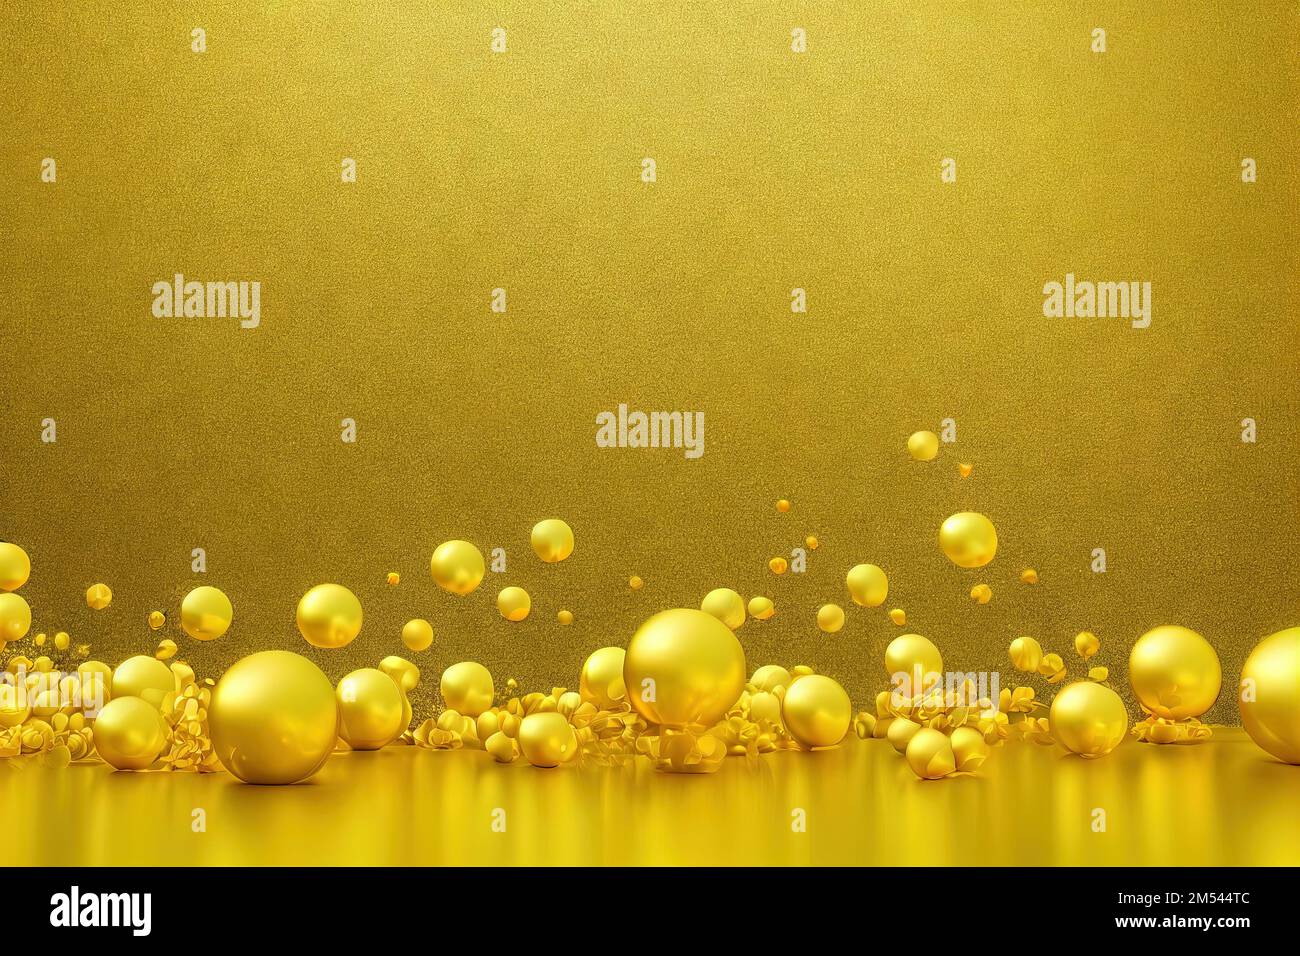 24K golden texture. Abstract concept art made for background wallpaper. glittering gold with metallic finish Stock Photo